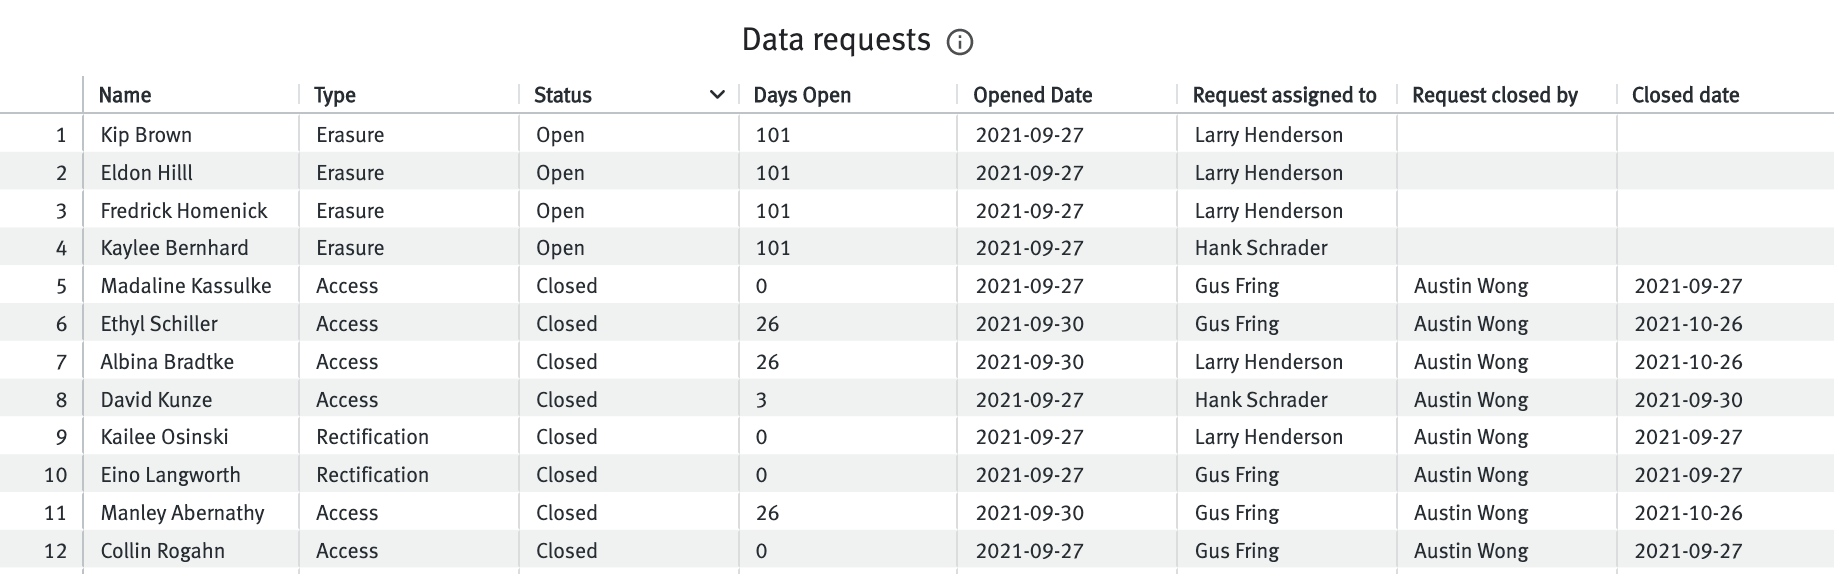 Data requests table in Visual Insights.